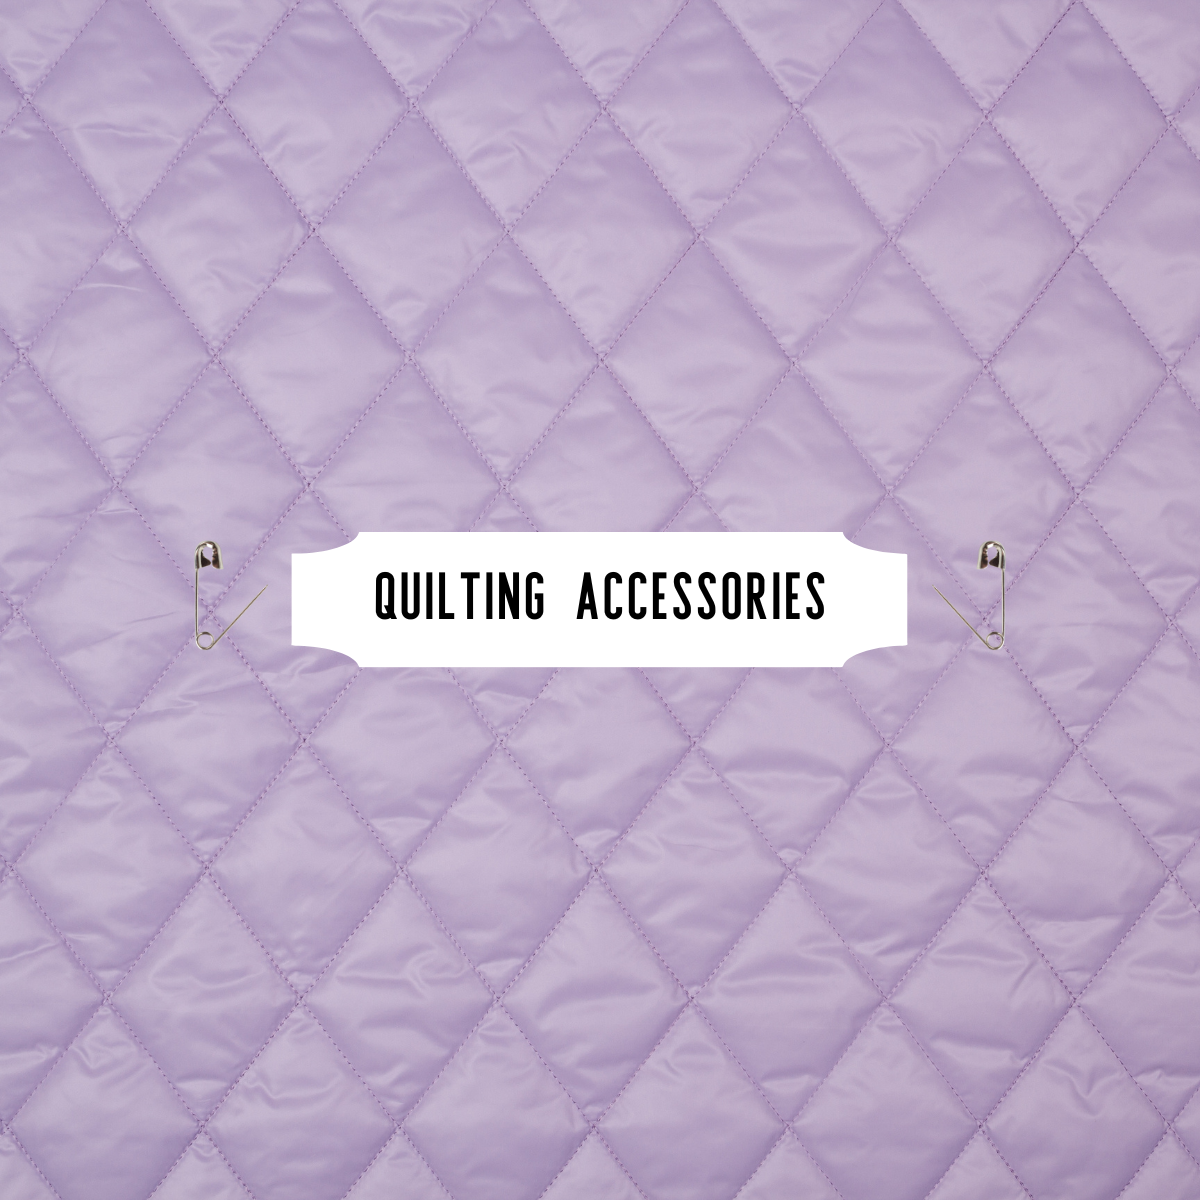 Quilting Notions